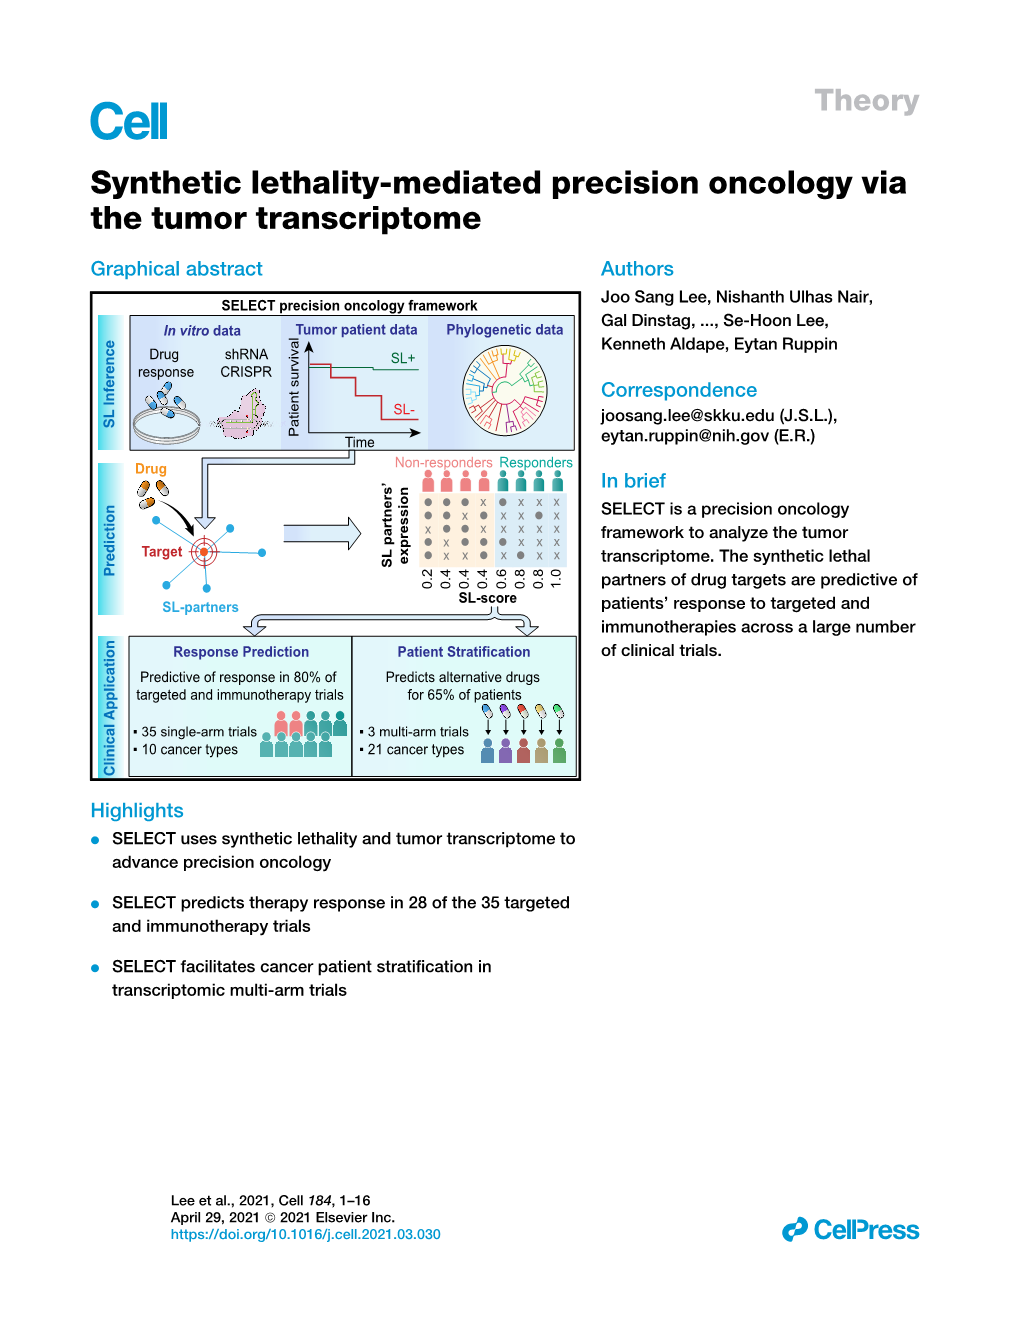 Synthetic Lethality-Mediated Precision Oncology Via the Tumor Transcriptome